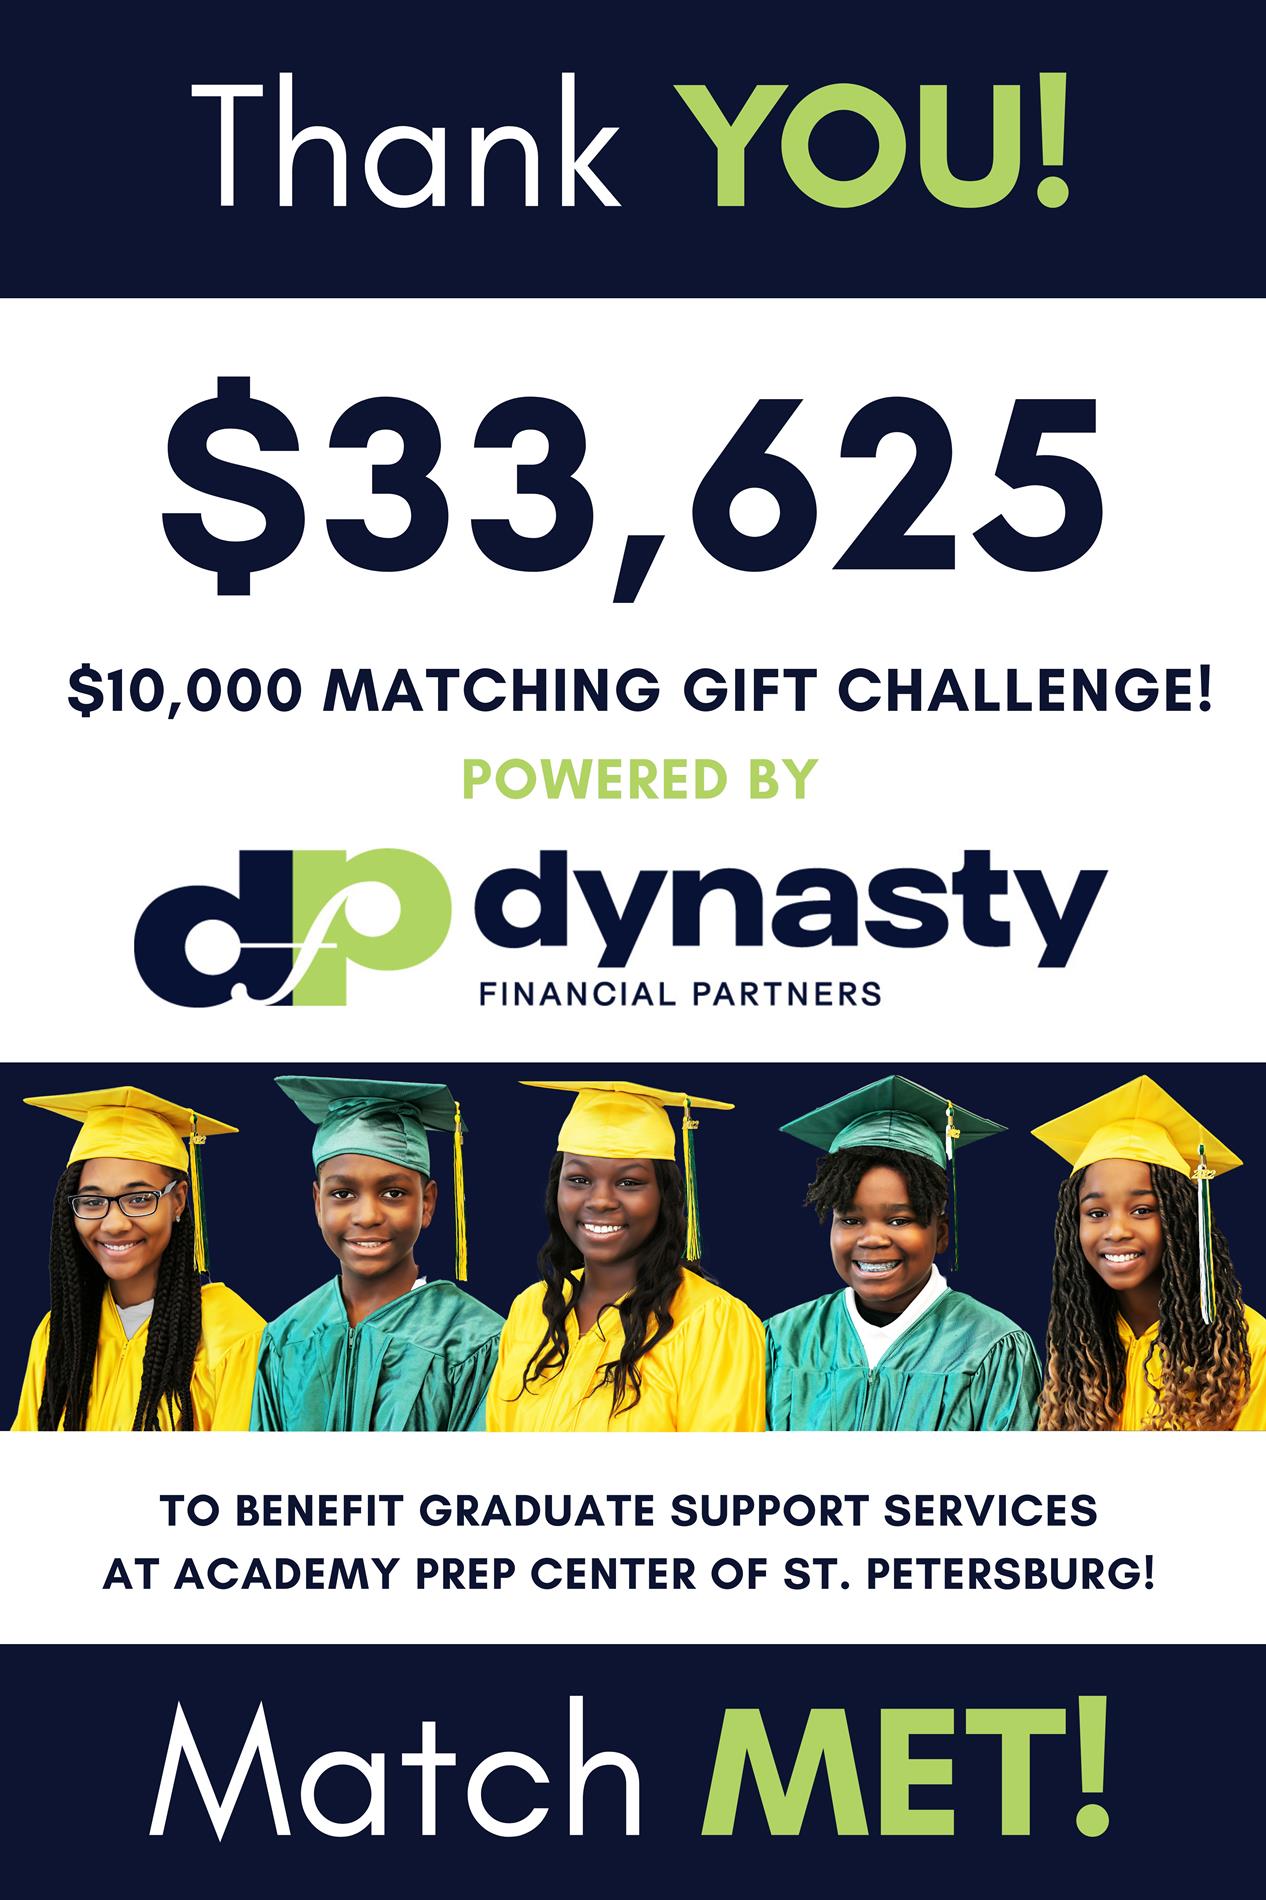 Dynasty Financial Partners Matching Gift Challenge Met